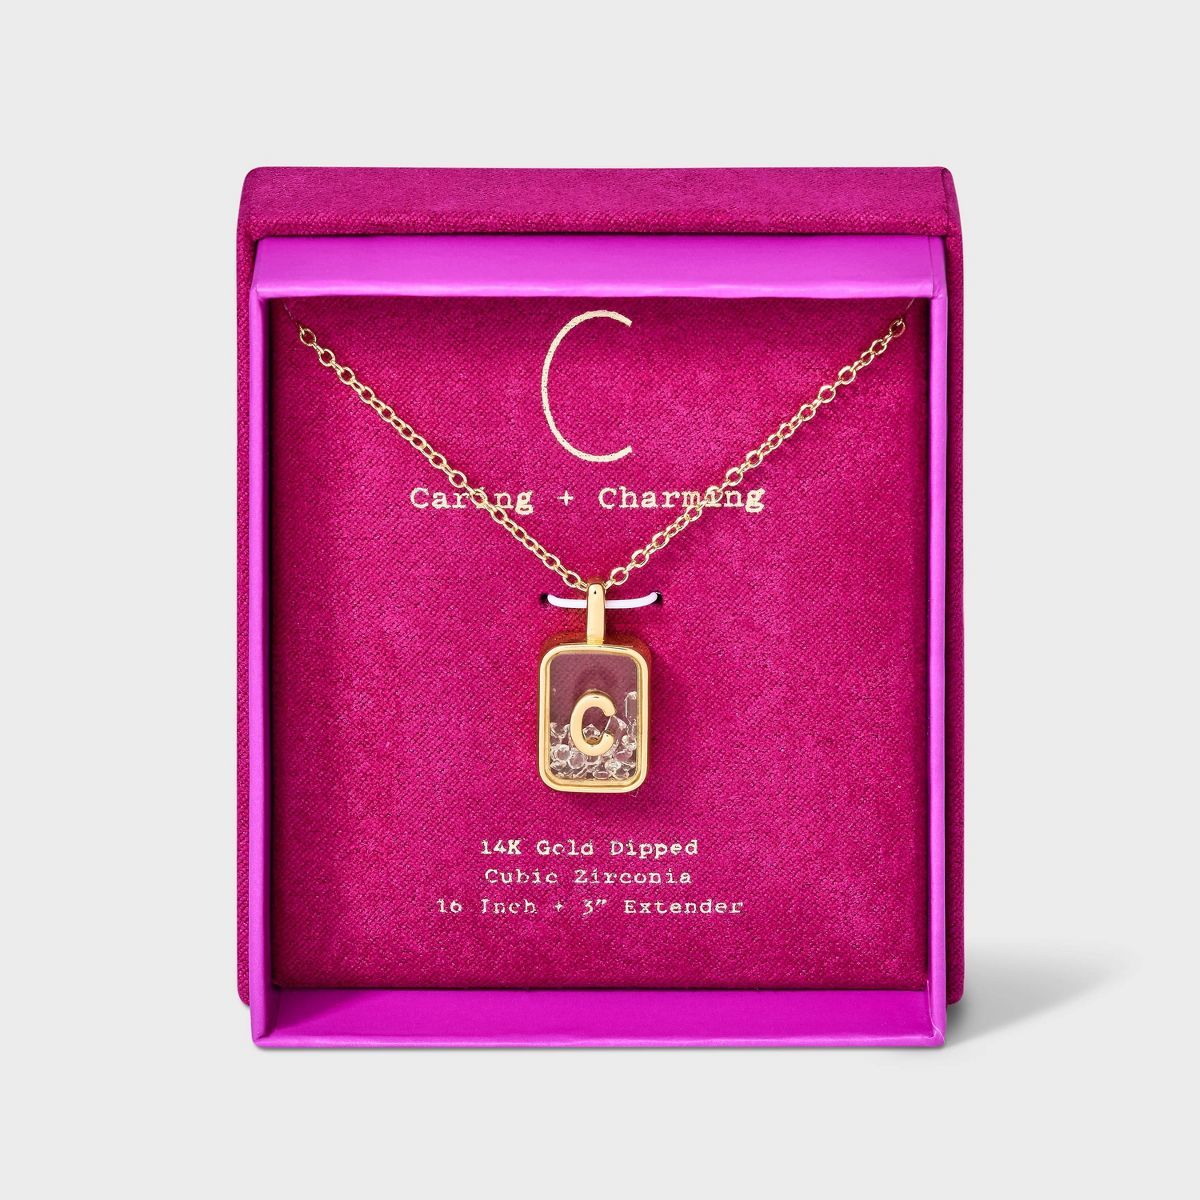 14k Gold Dipped Cubic Zirconia Pierced Initial Shaker Necklace - A New Day™ Gold | Target